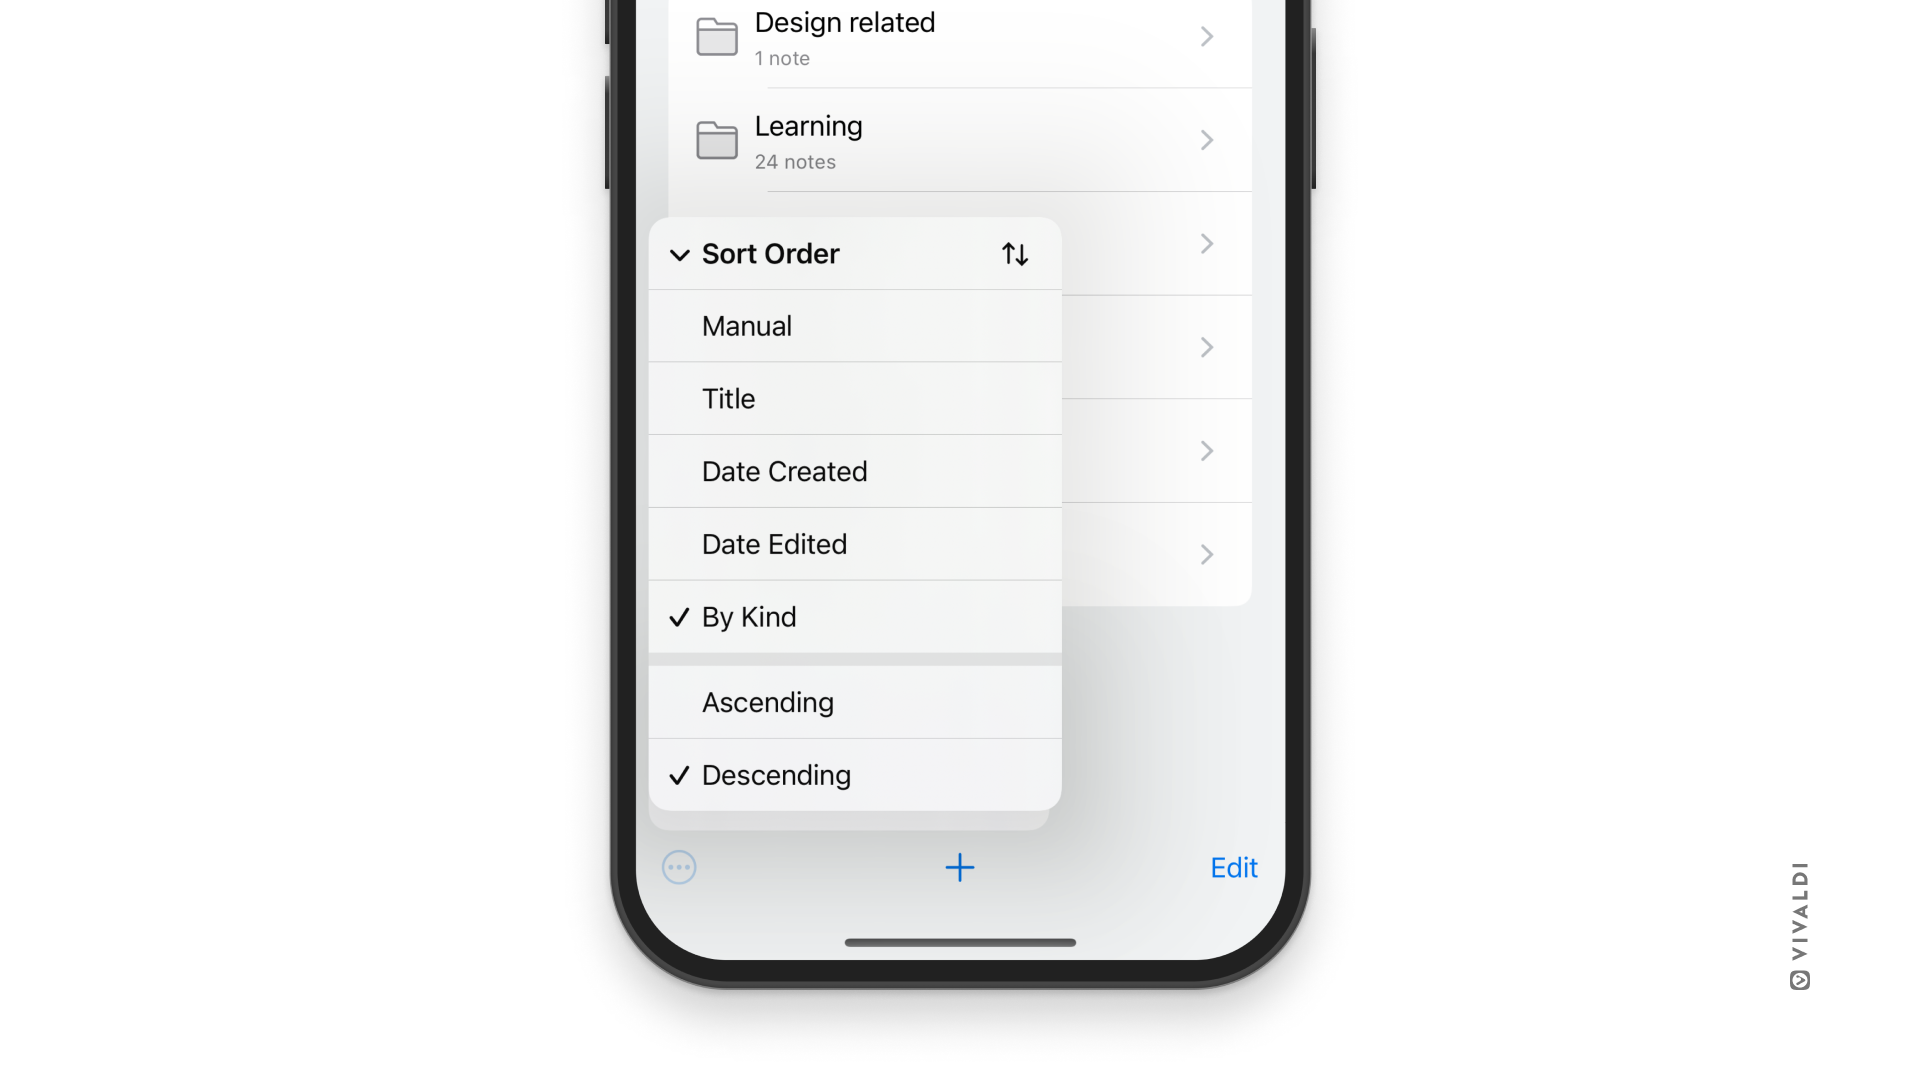 Vivaldi on iOS' Notes Panel with the sorting menu open.